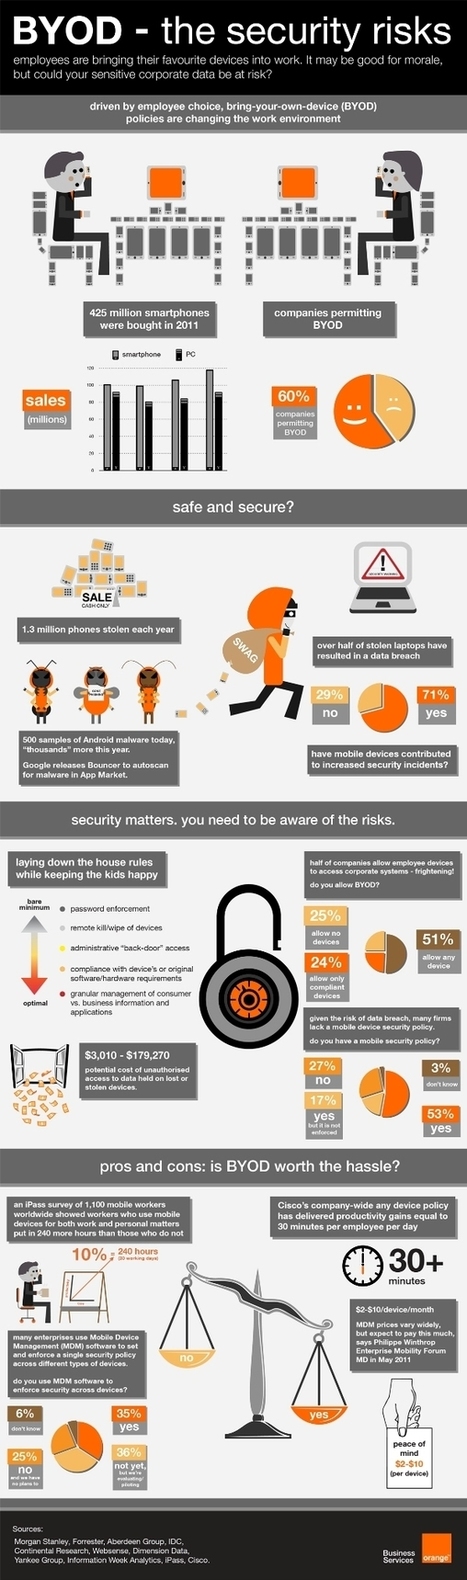 BYOD Security Issues [Infographic] | Aprendiendo a Distancia | Scoop.it